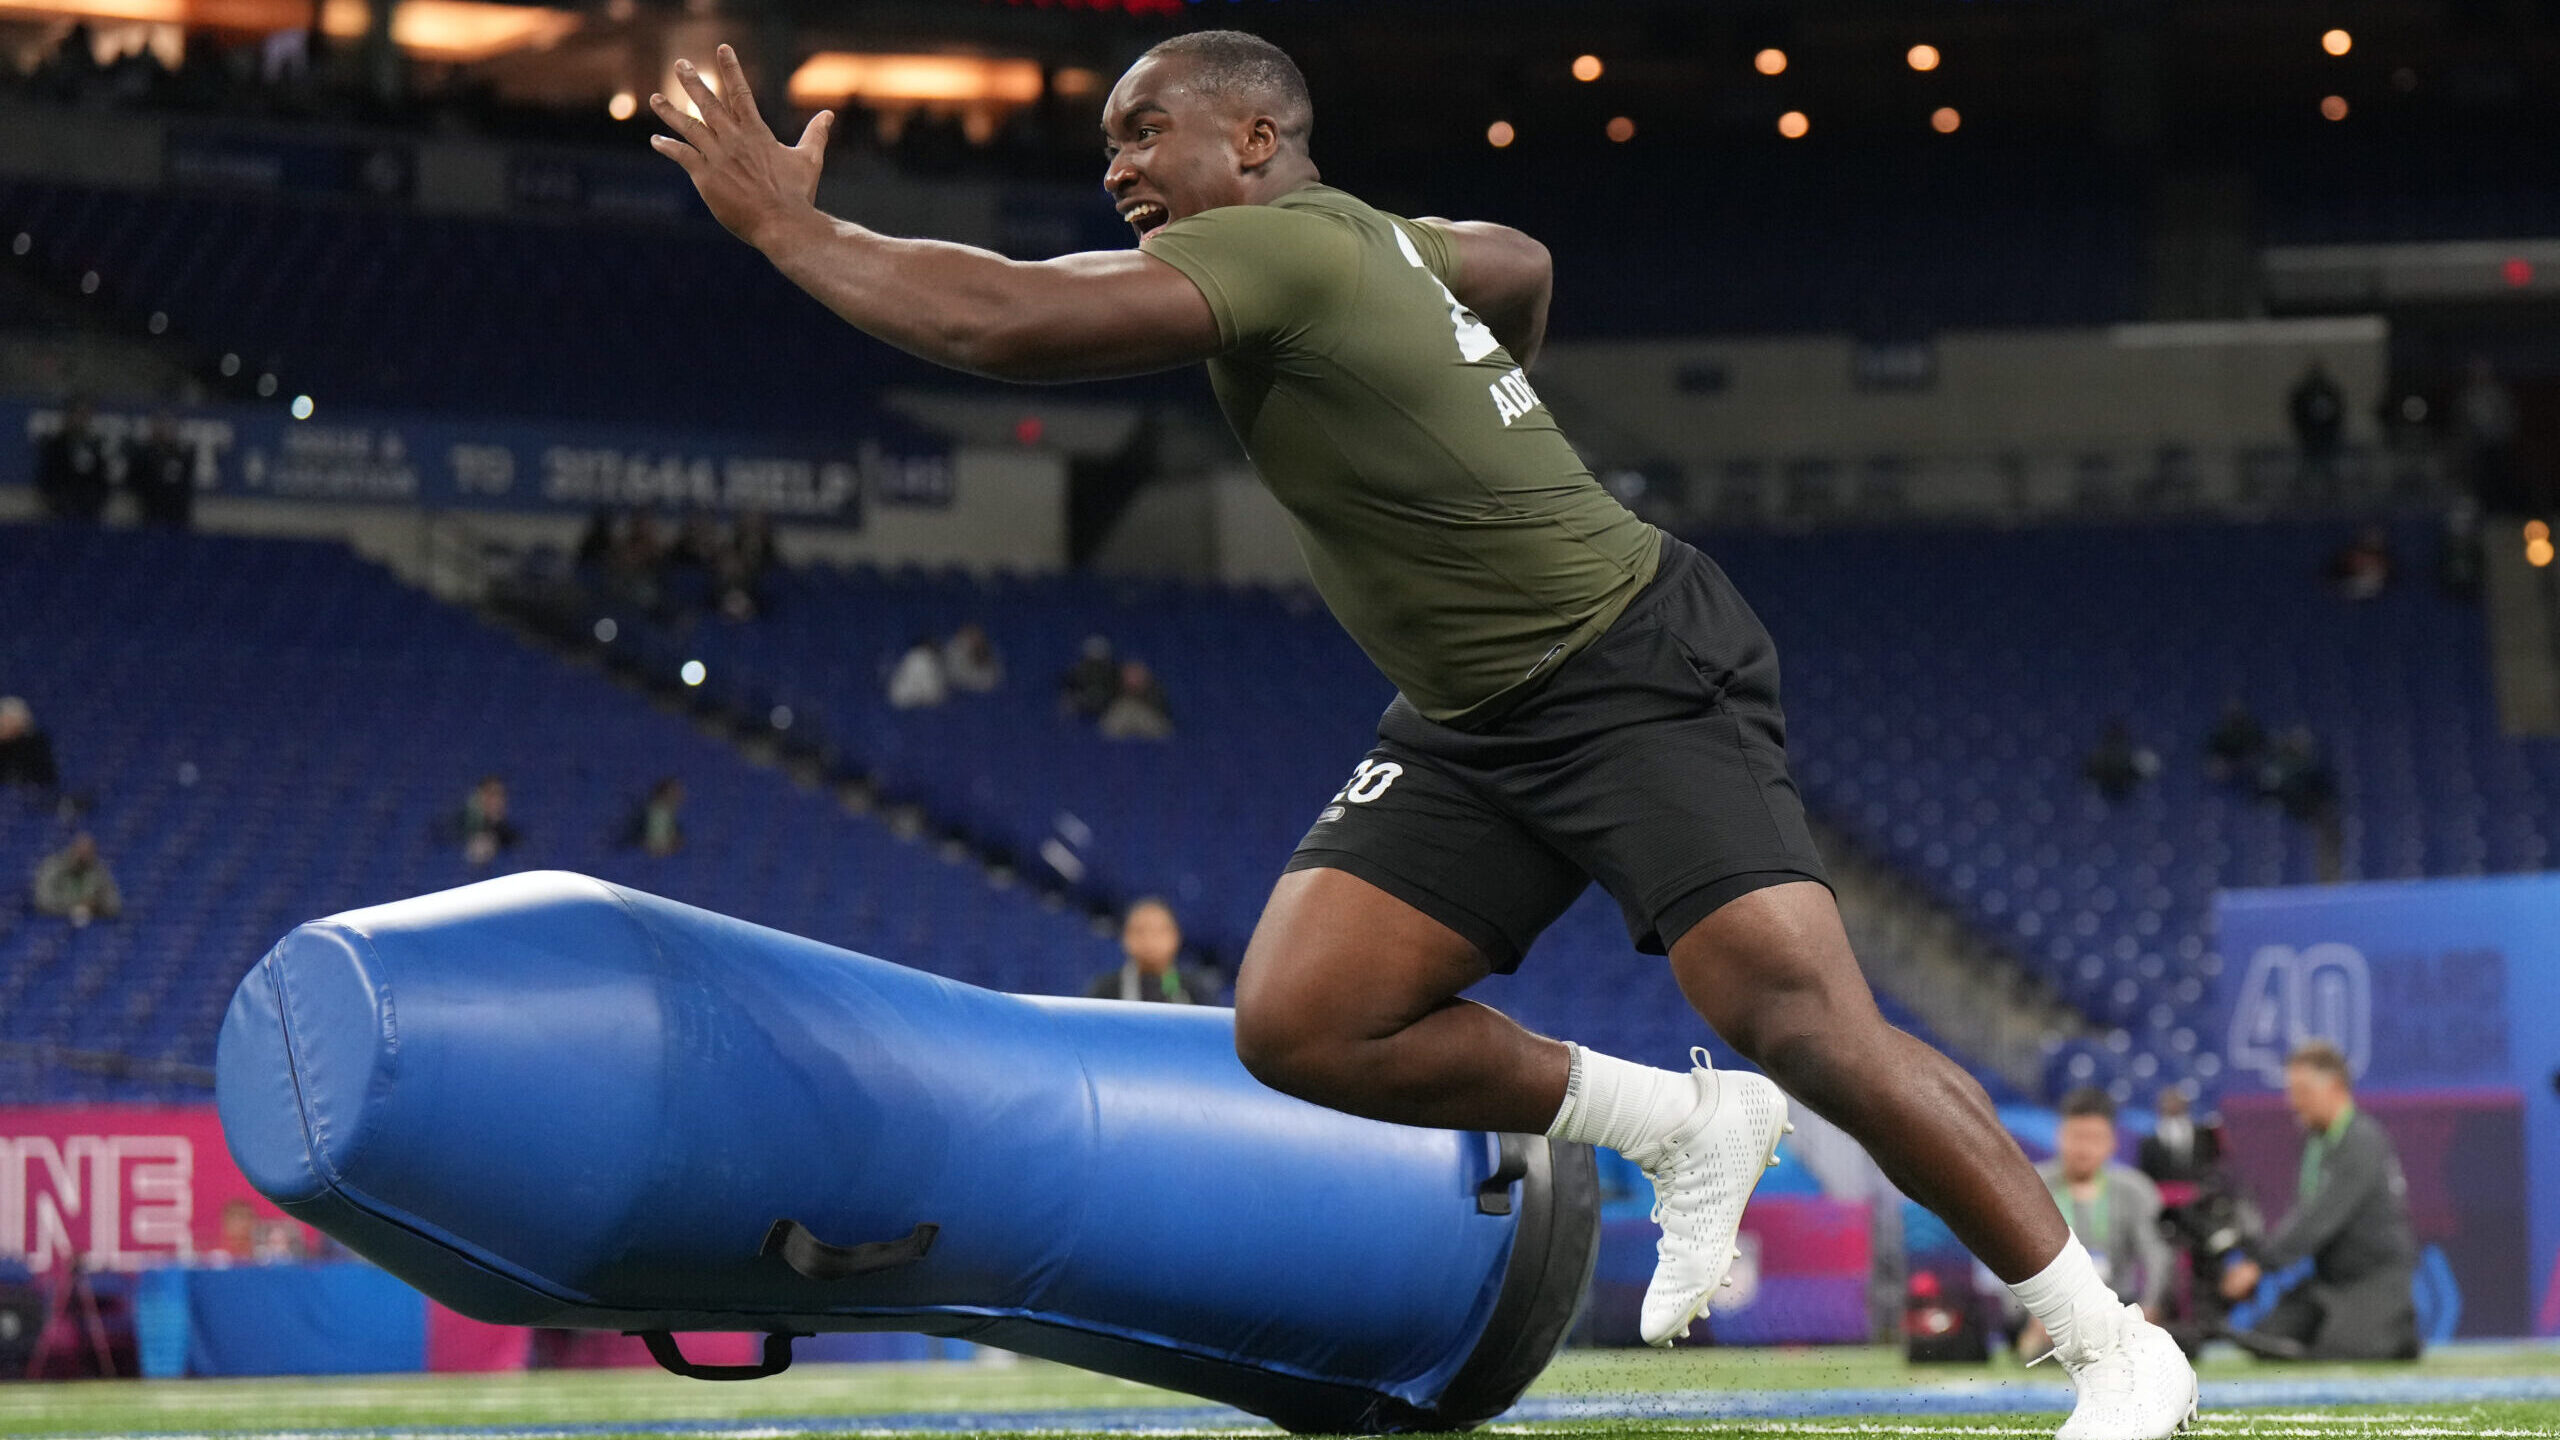 2023 NFL Combine: 7 Biggest Takeaways From DL, LB Workouts